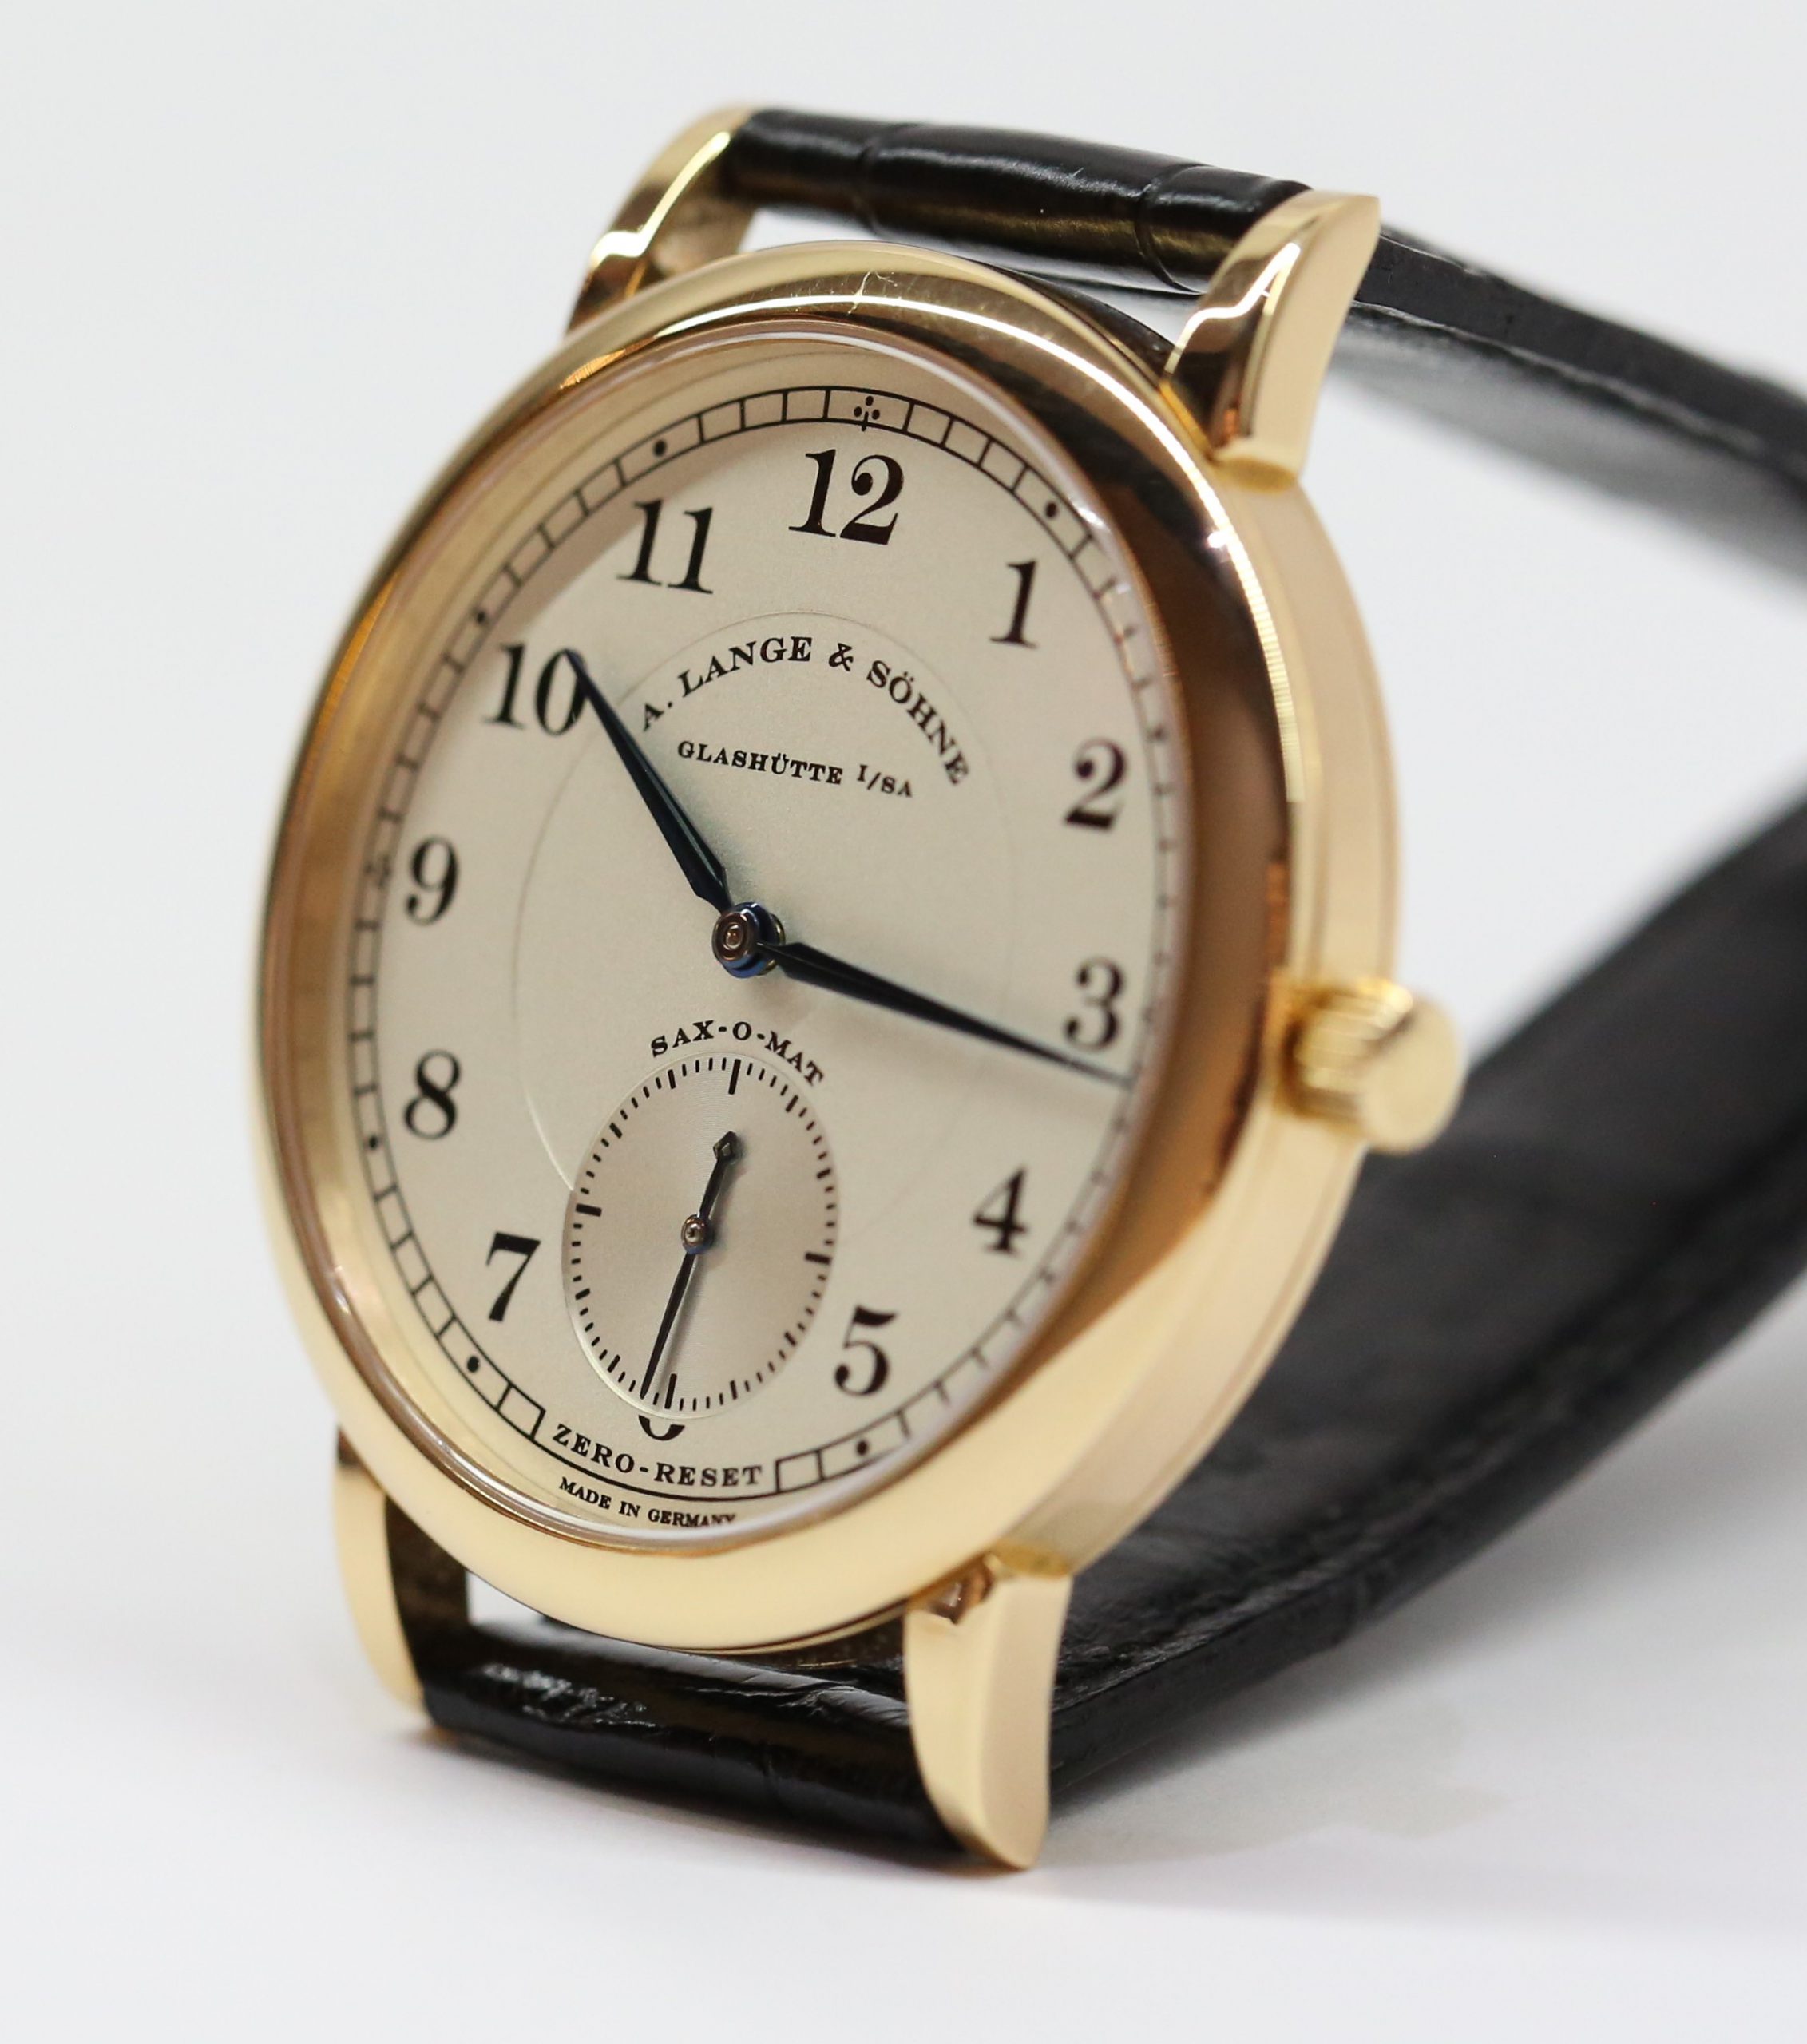 A. Lange & Sohne 1815 Automatic Sax-O-Mat Zero Reset in 18ct Rose Gold ...